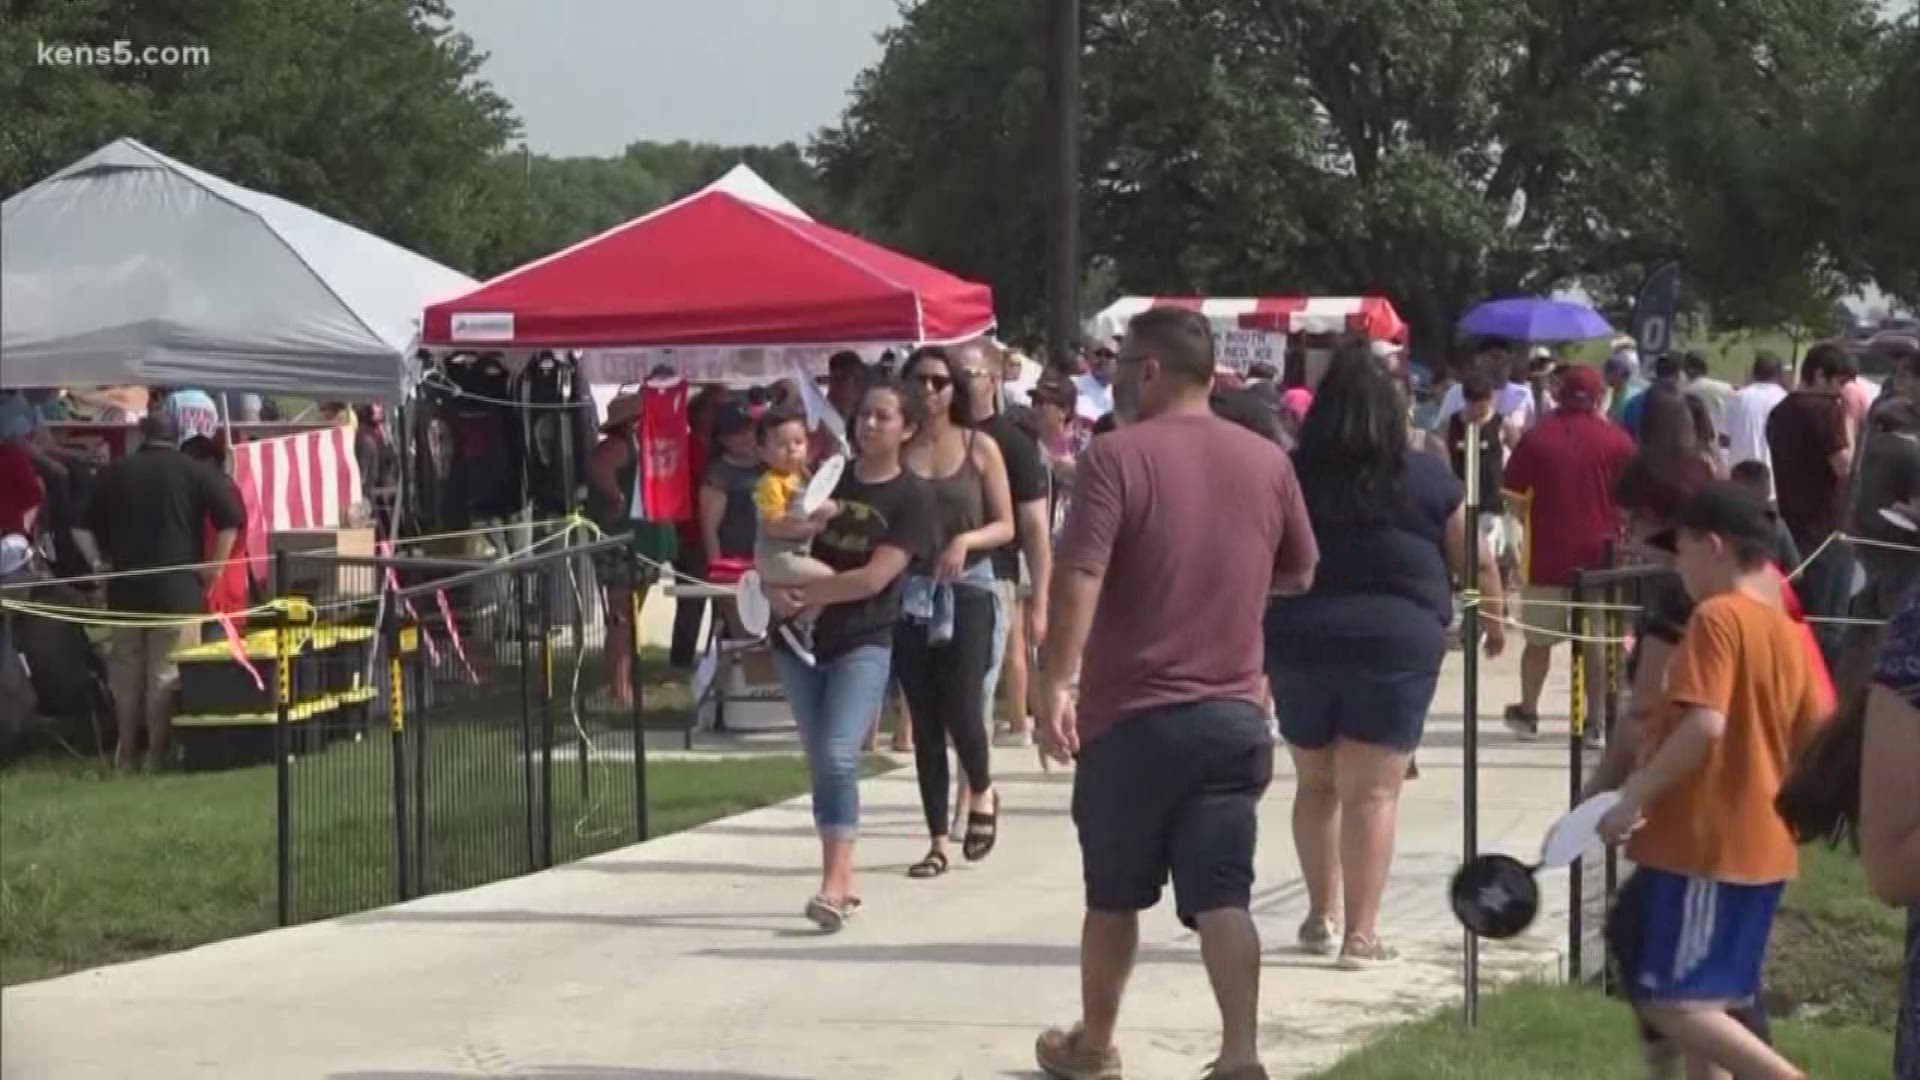 Since 2012, the Barbacoa and Big Red Festival has been packed with guests every year. The festival will now be two days this summer.